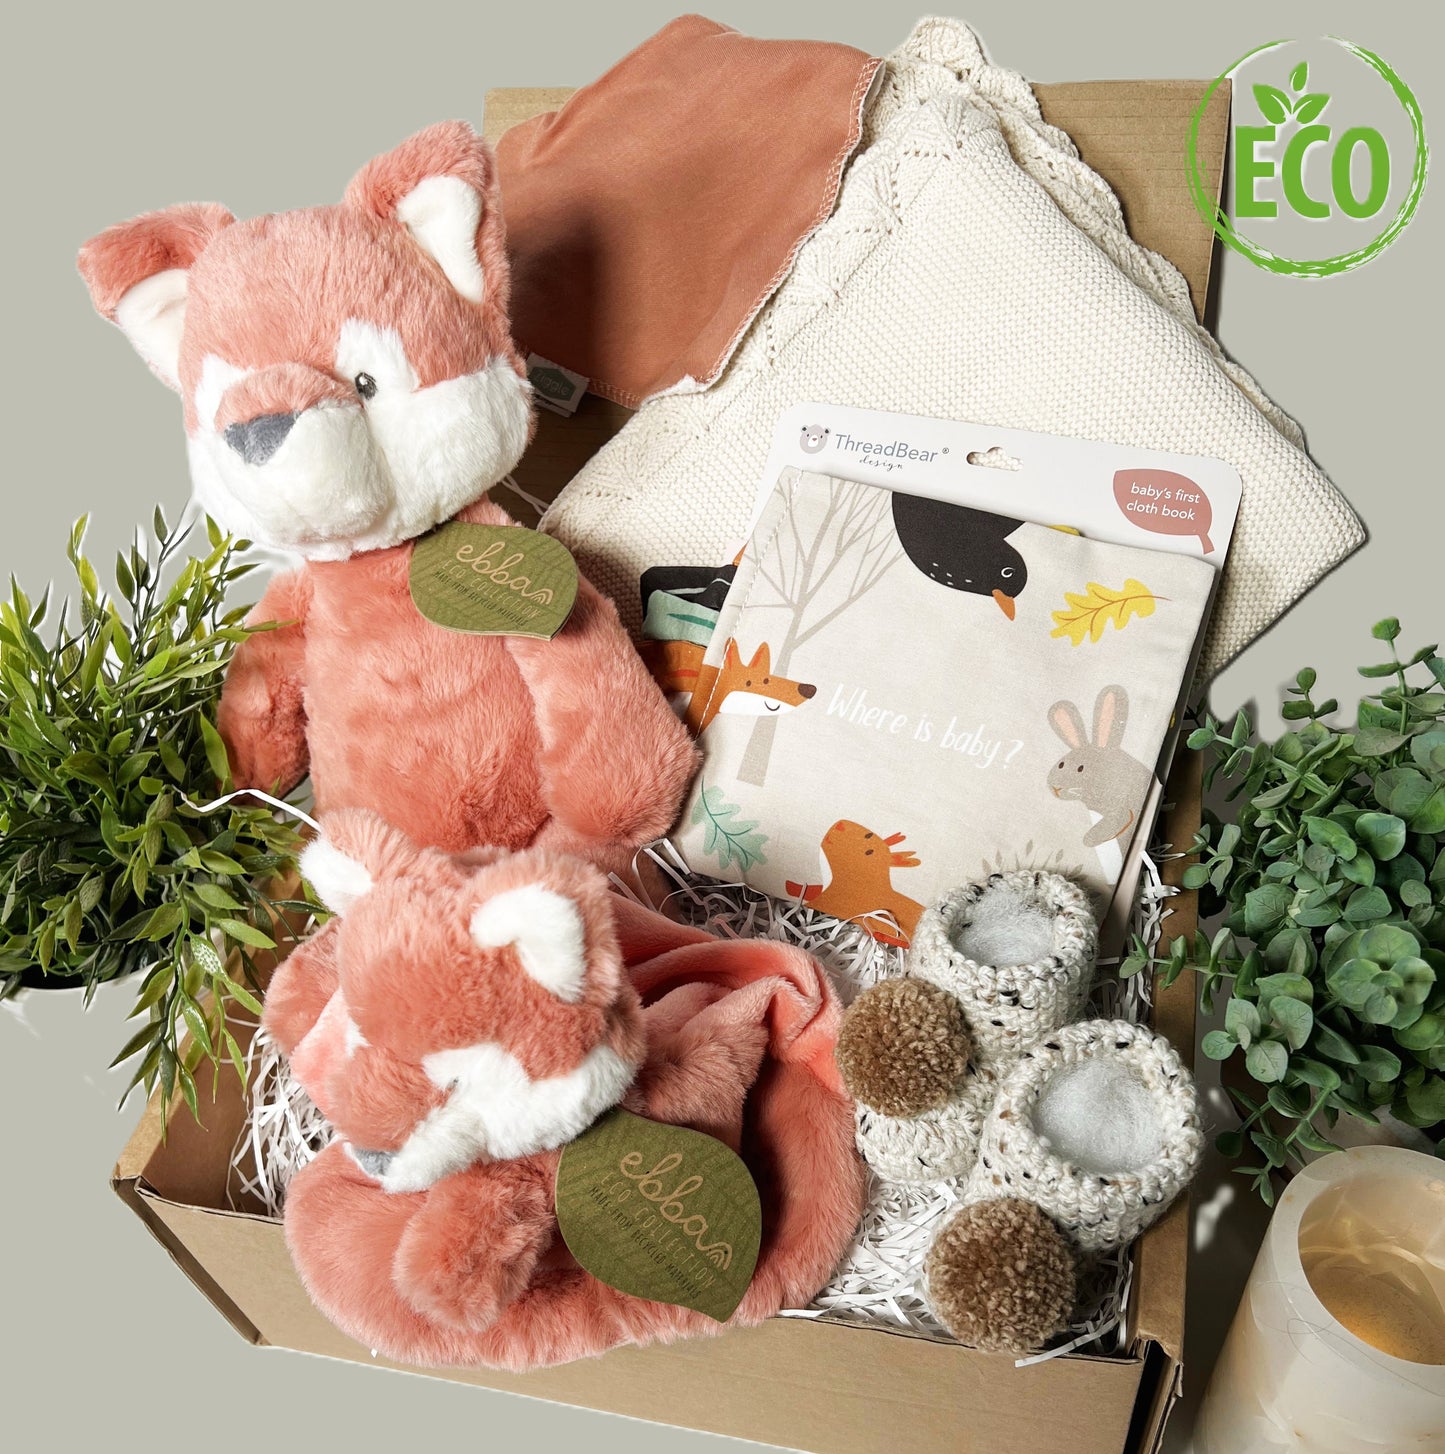 Neutral New Baby shower gift full of eco freindly items including a cotton baby blanket, a cloth baby book, an Ebba Fox soft toy and Ebba fox baby comforter, a cotton baby bib and a pair of crocheted baby booties with pompoms.